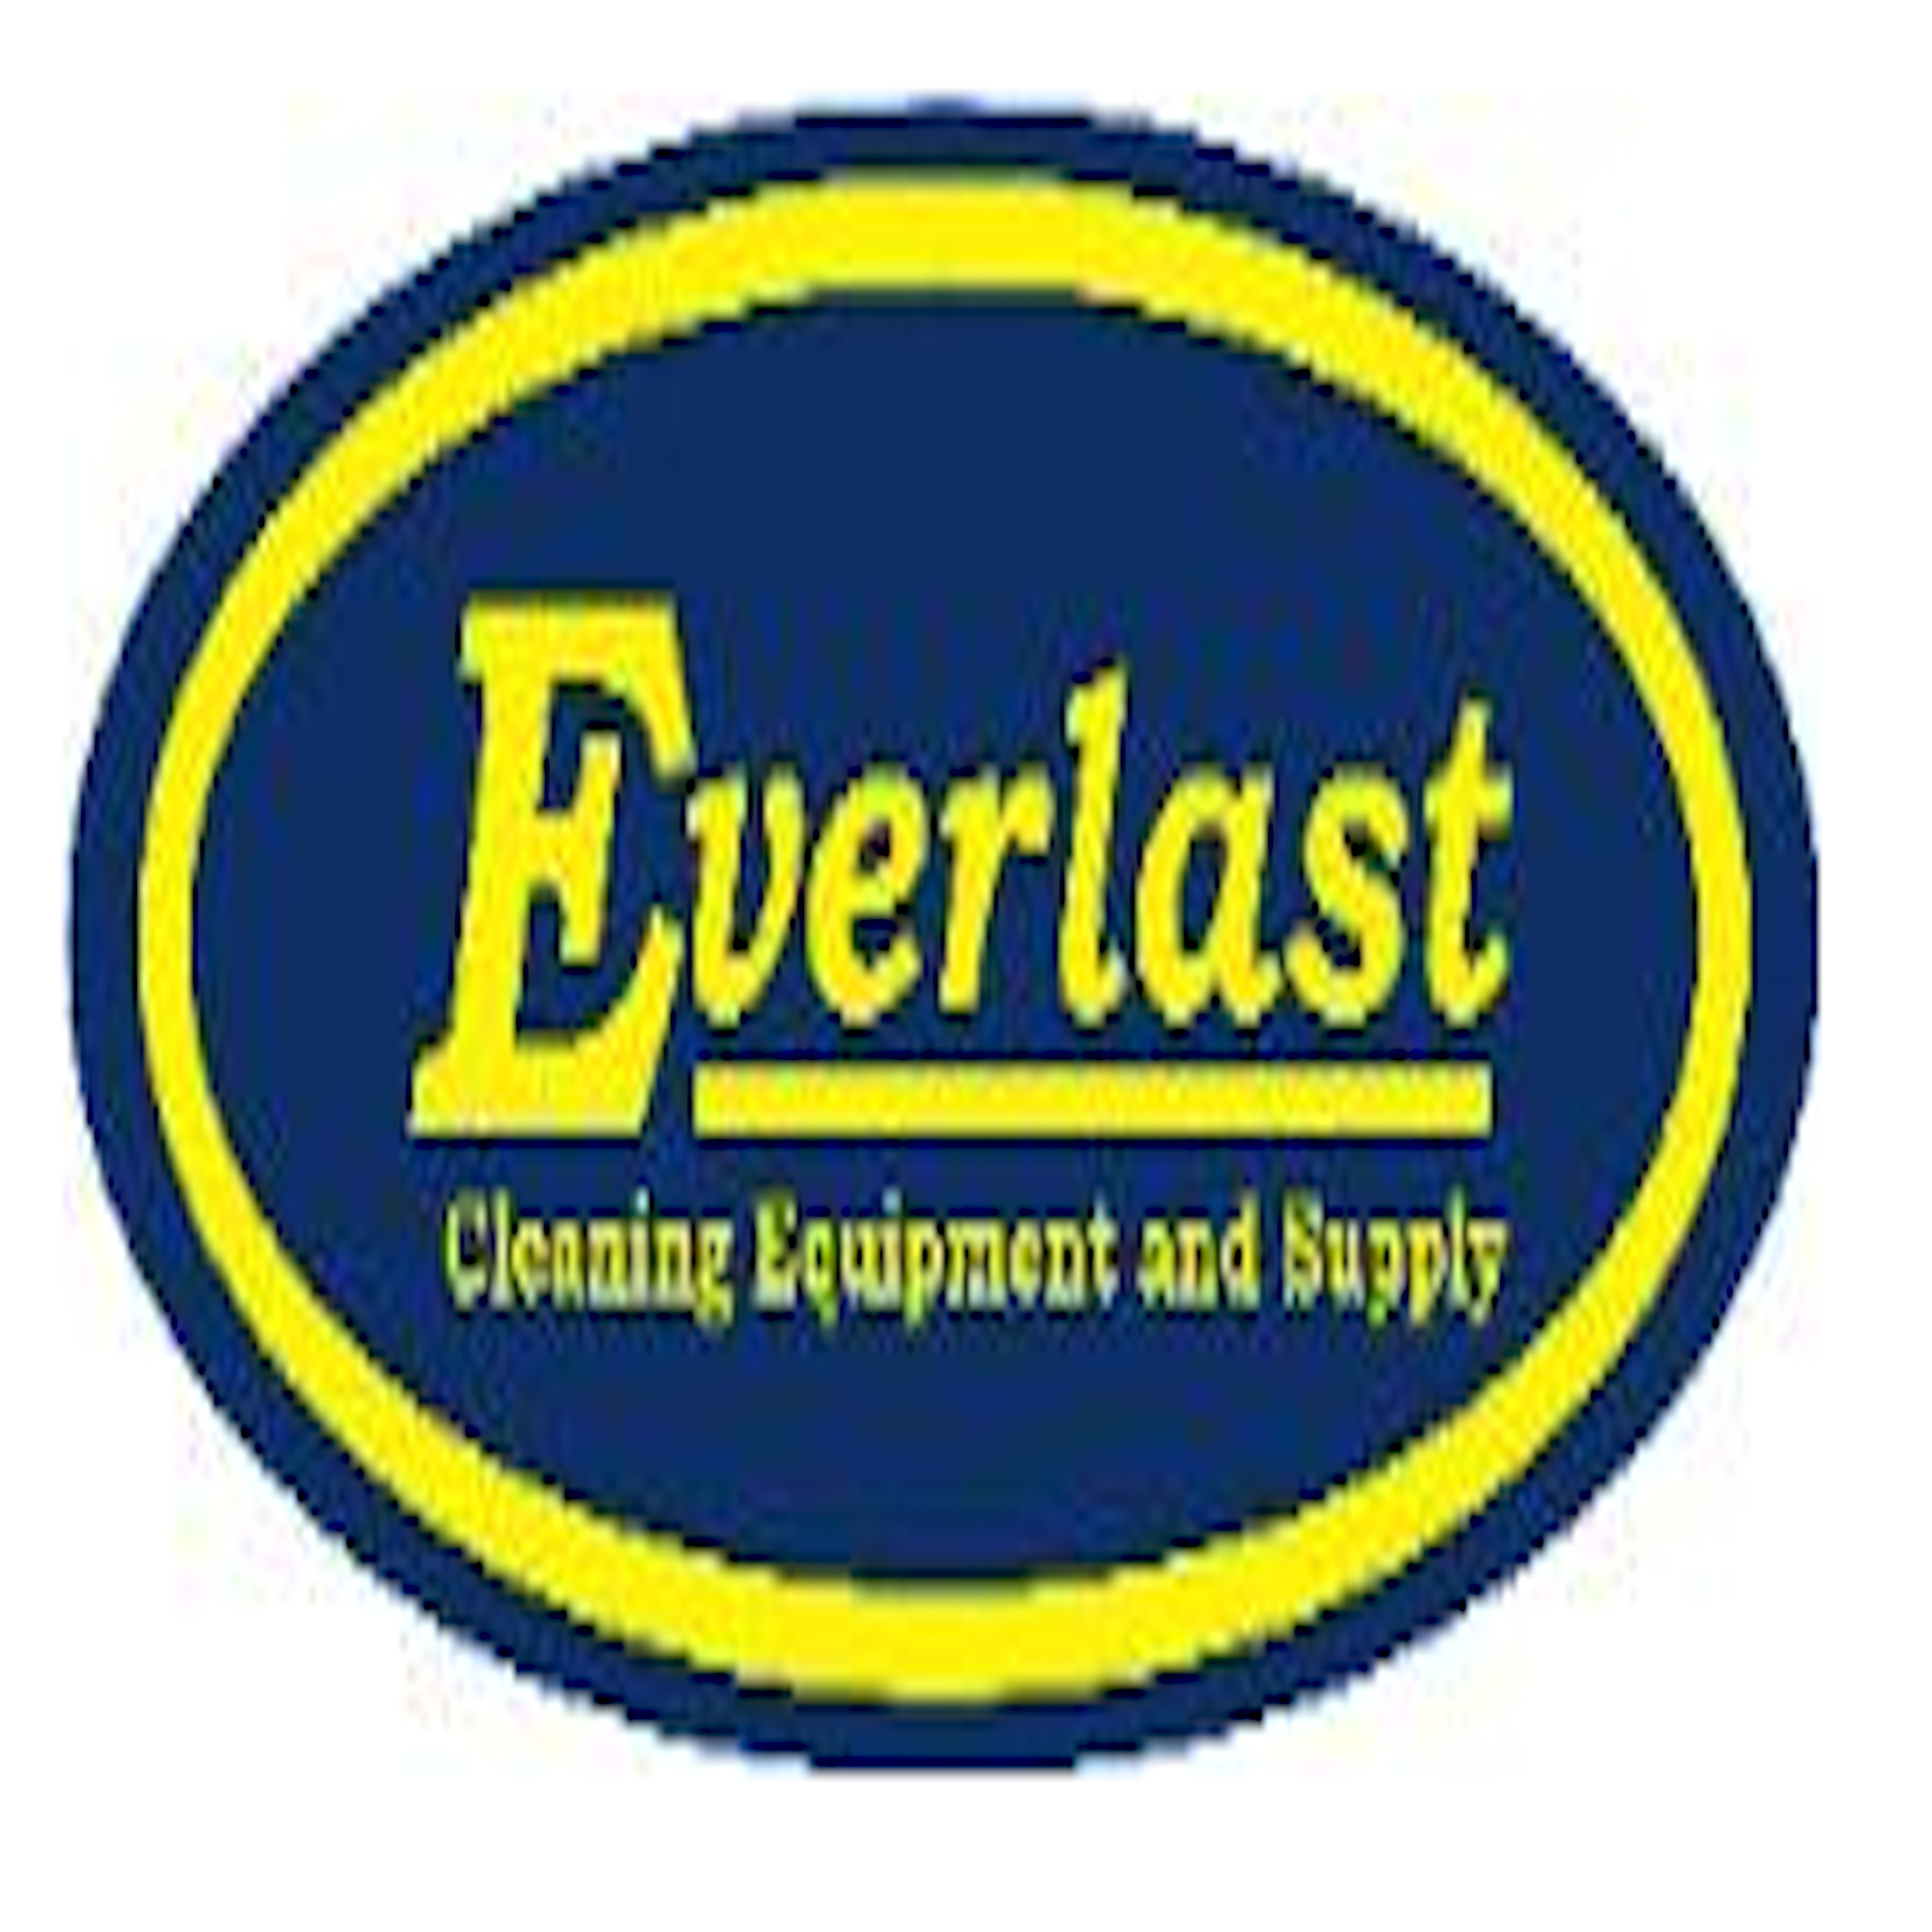 Everlast Cleaning